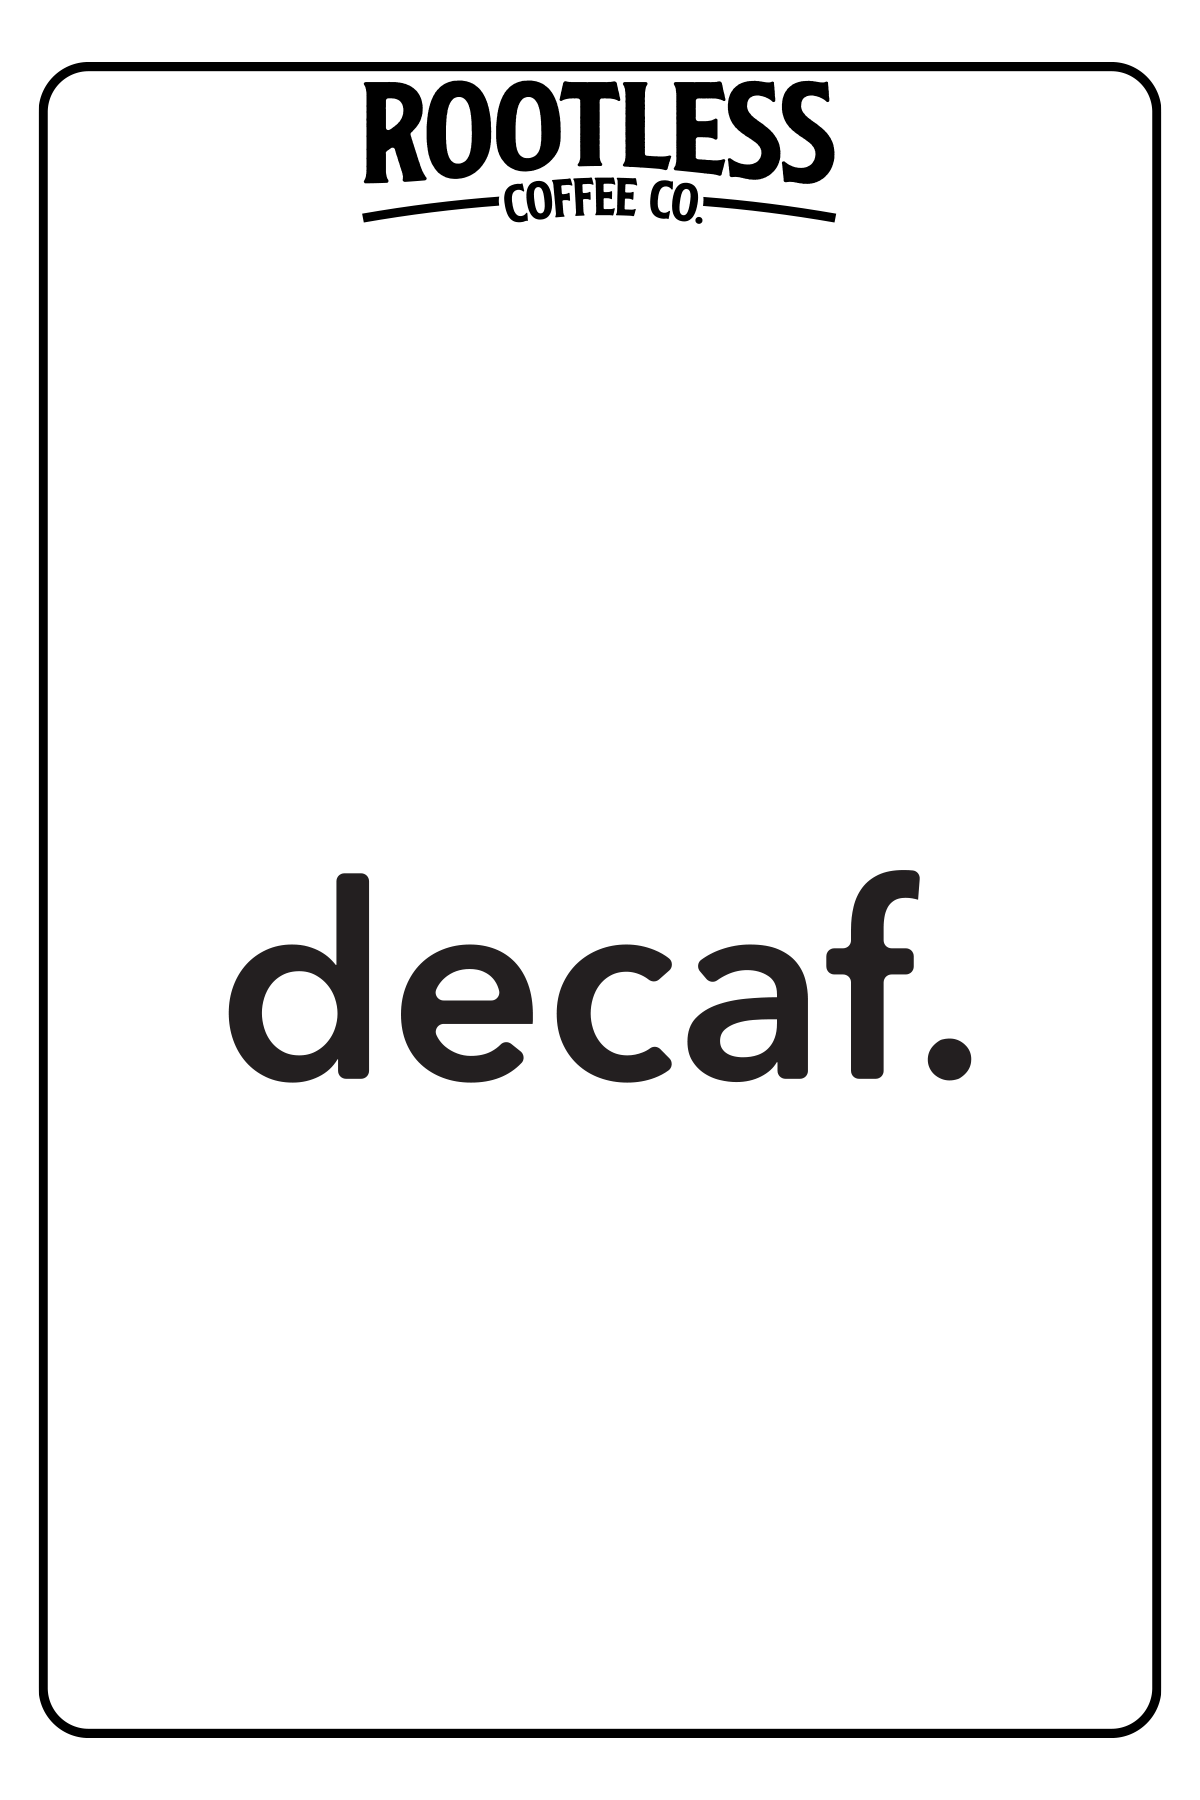 The Sugarcane Decaf Process Explained